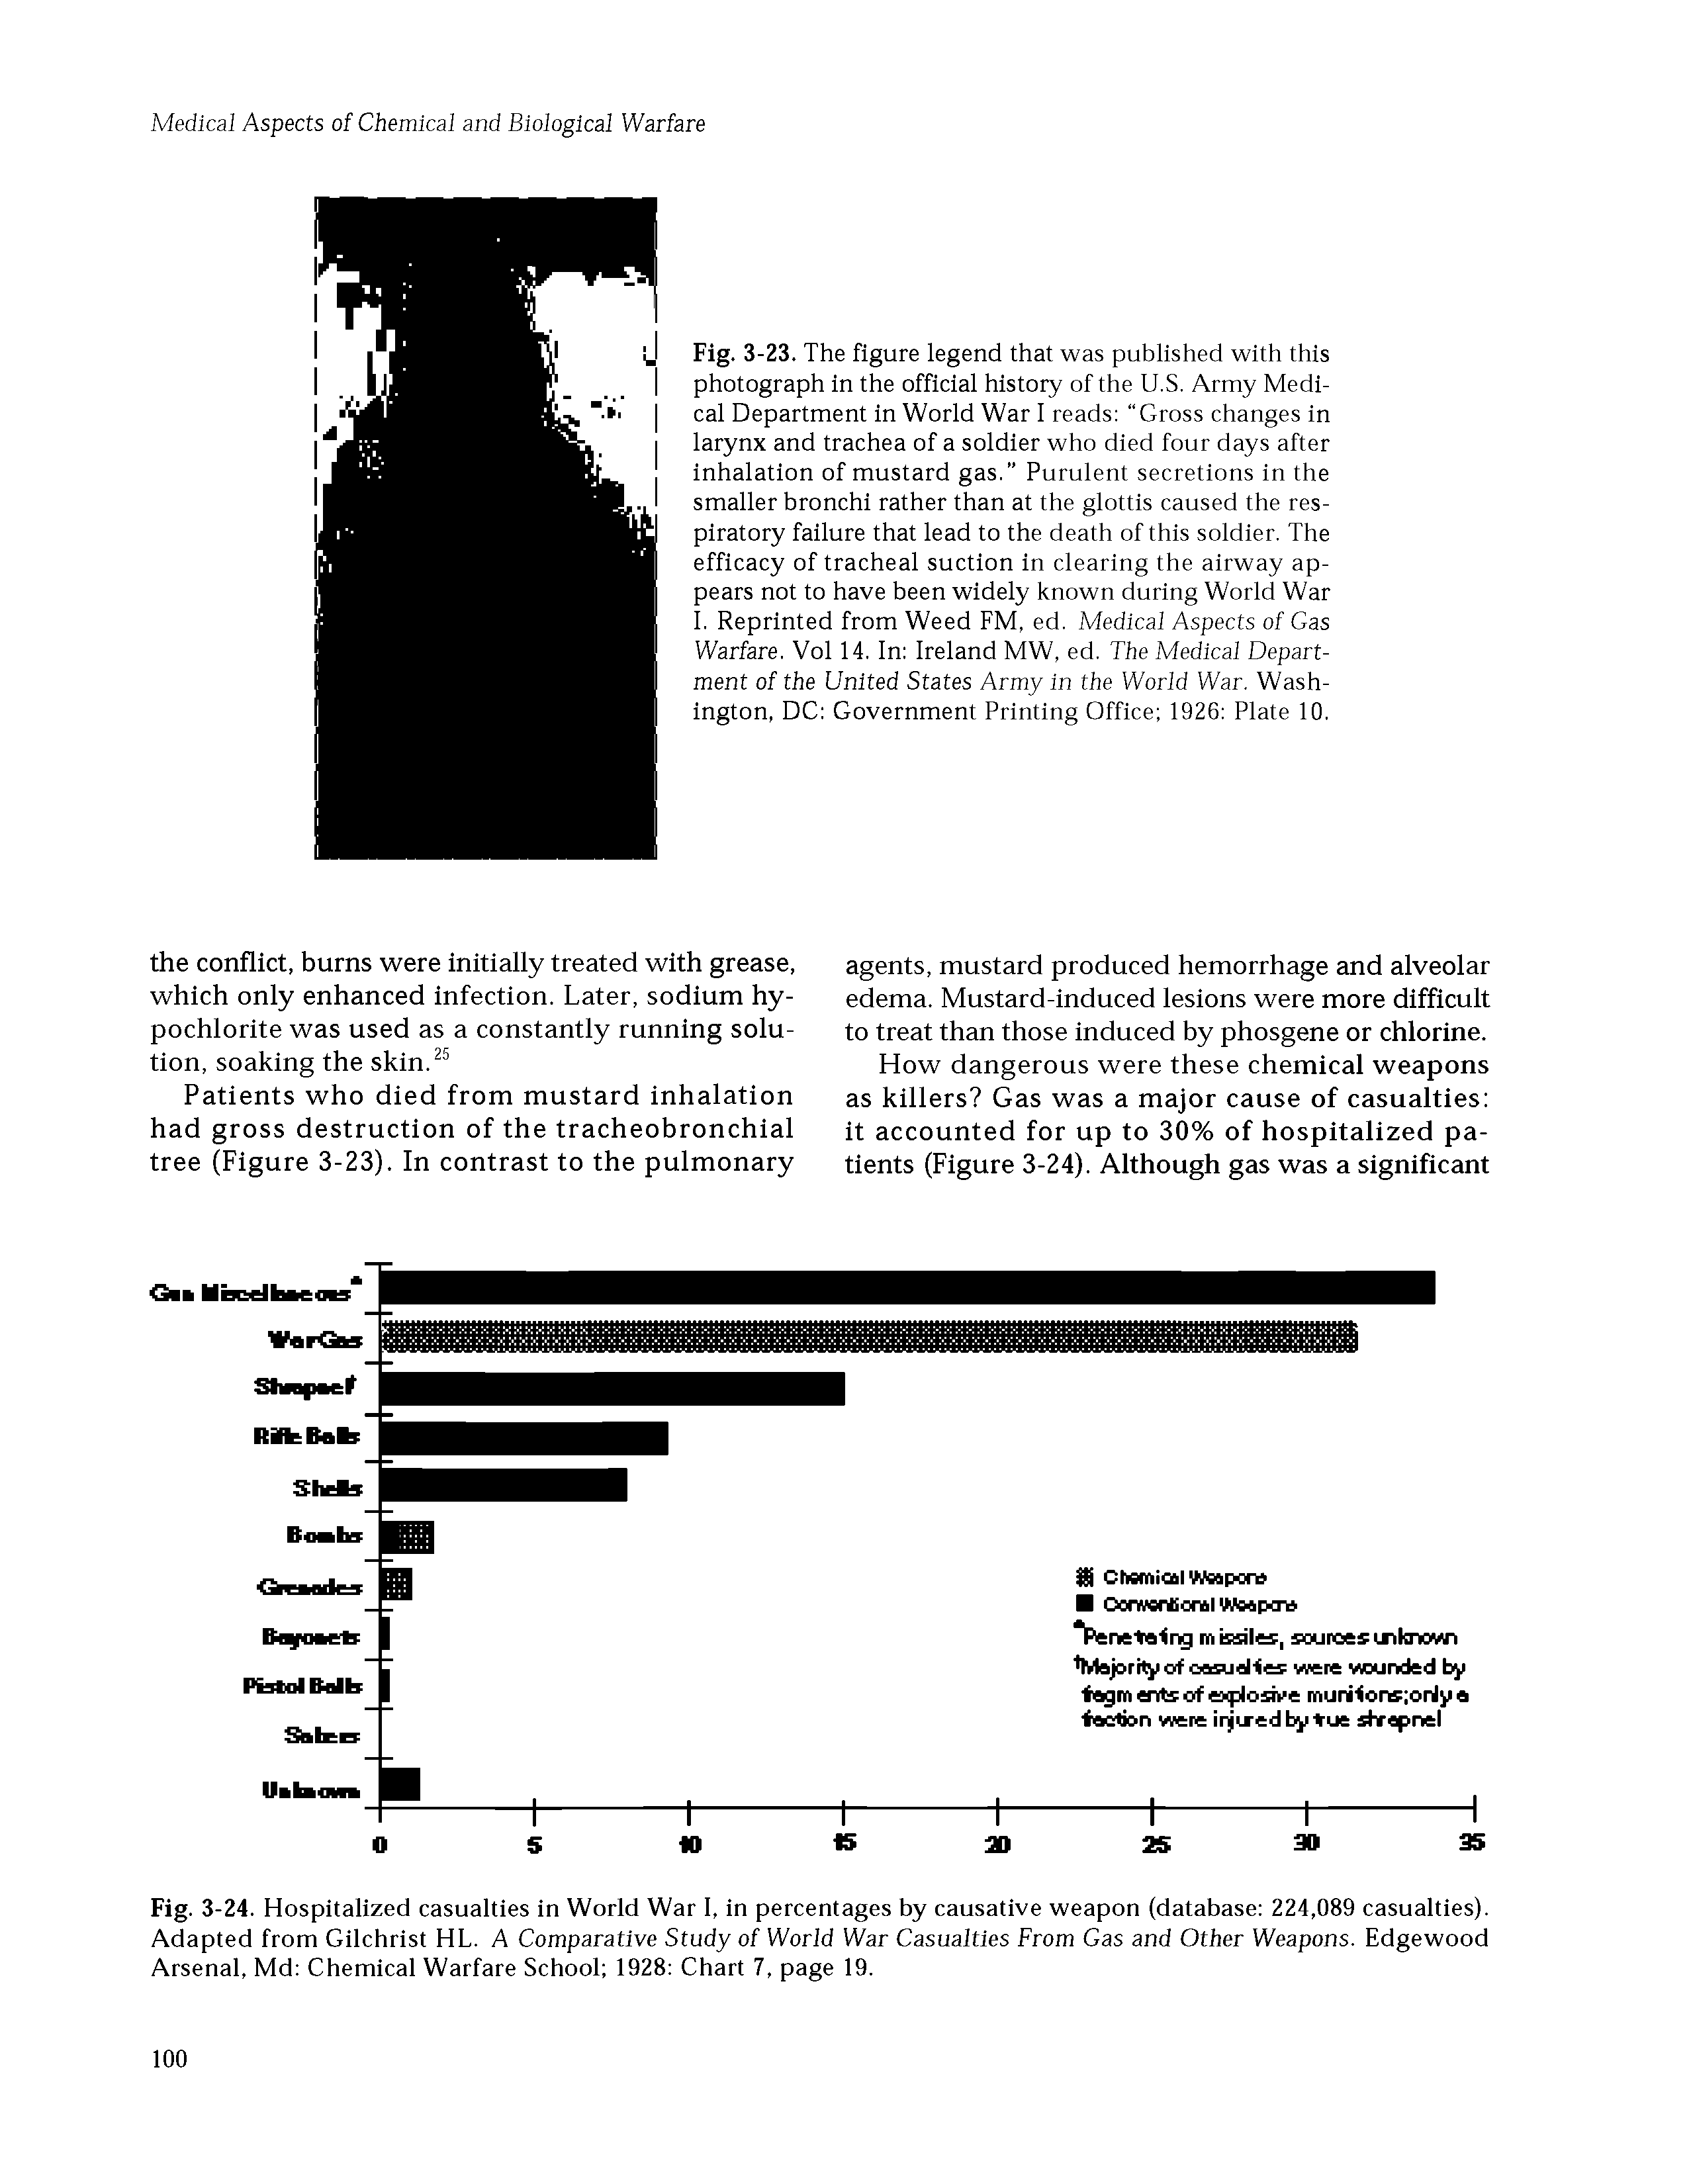 Fig. 3-23. The figure legend that was published with this photograph in the official history of the U.S. Army Medical Department in World War I reads Gross changes in larynx and trachea of a soldier who died four days after inhalation of mustard gas. Purulent secretions in the smaller bronchi rather than at the glottis caused the respiratory failure that lead to the death of this soldier. The efficacy of tracheal suction in clearing the airway appears not to have been widely known during World War I. Reprinted from Weed FM, ed. Medical Aspects of Gas Warfare. Vol 14. In Ireland MW, ed. The Medical Department of the United States Army in the World War. Washington, DC Government Printing Office 1926 Plate 10.